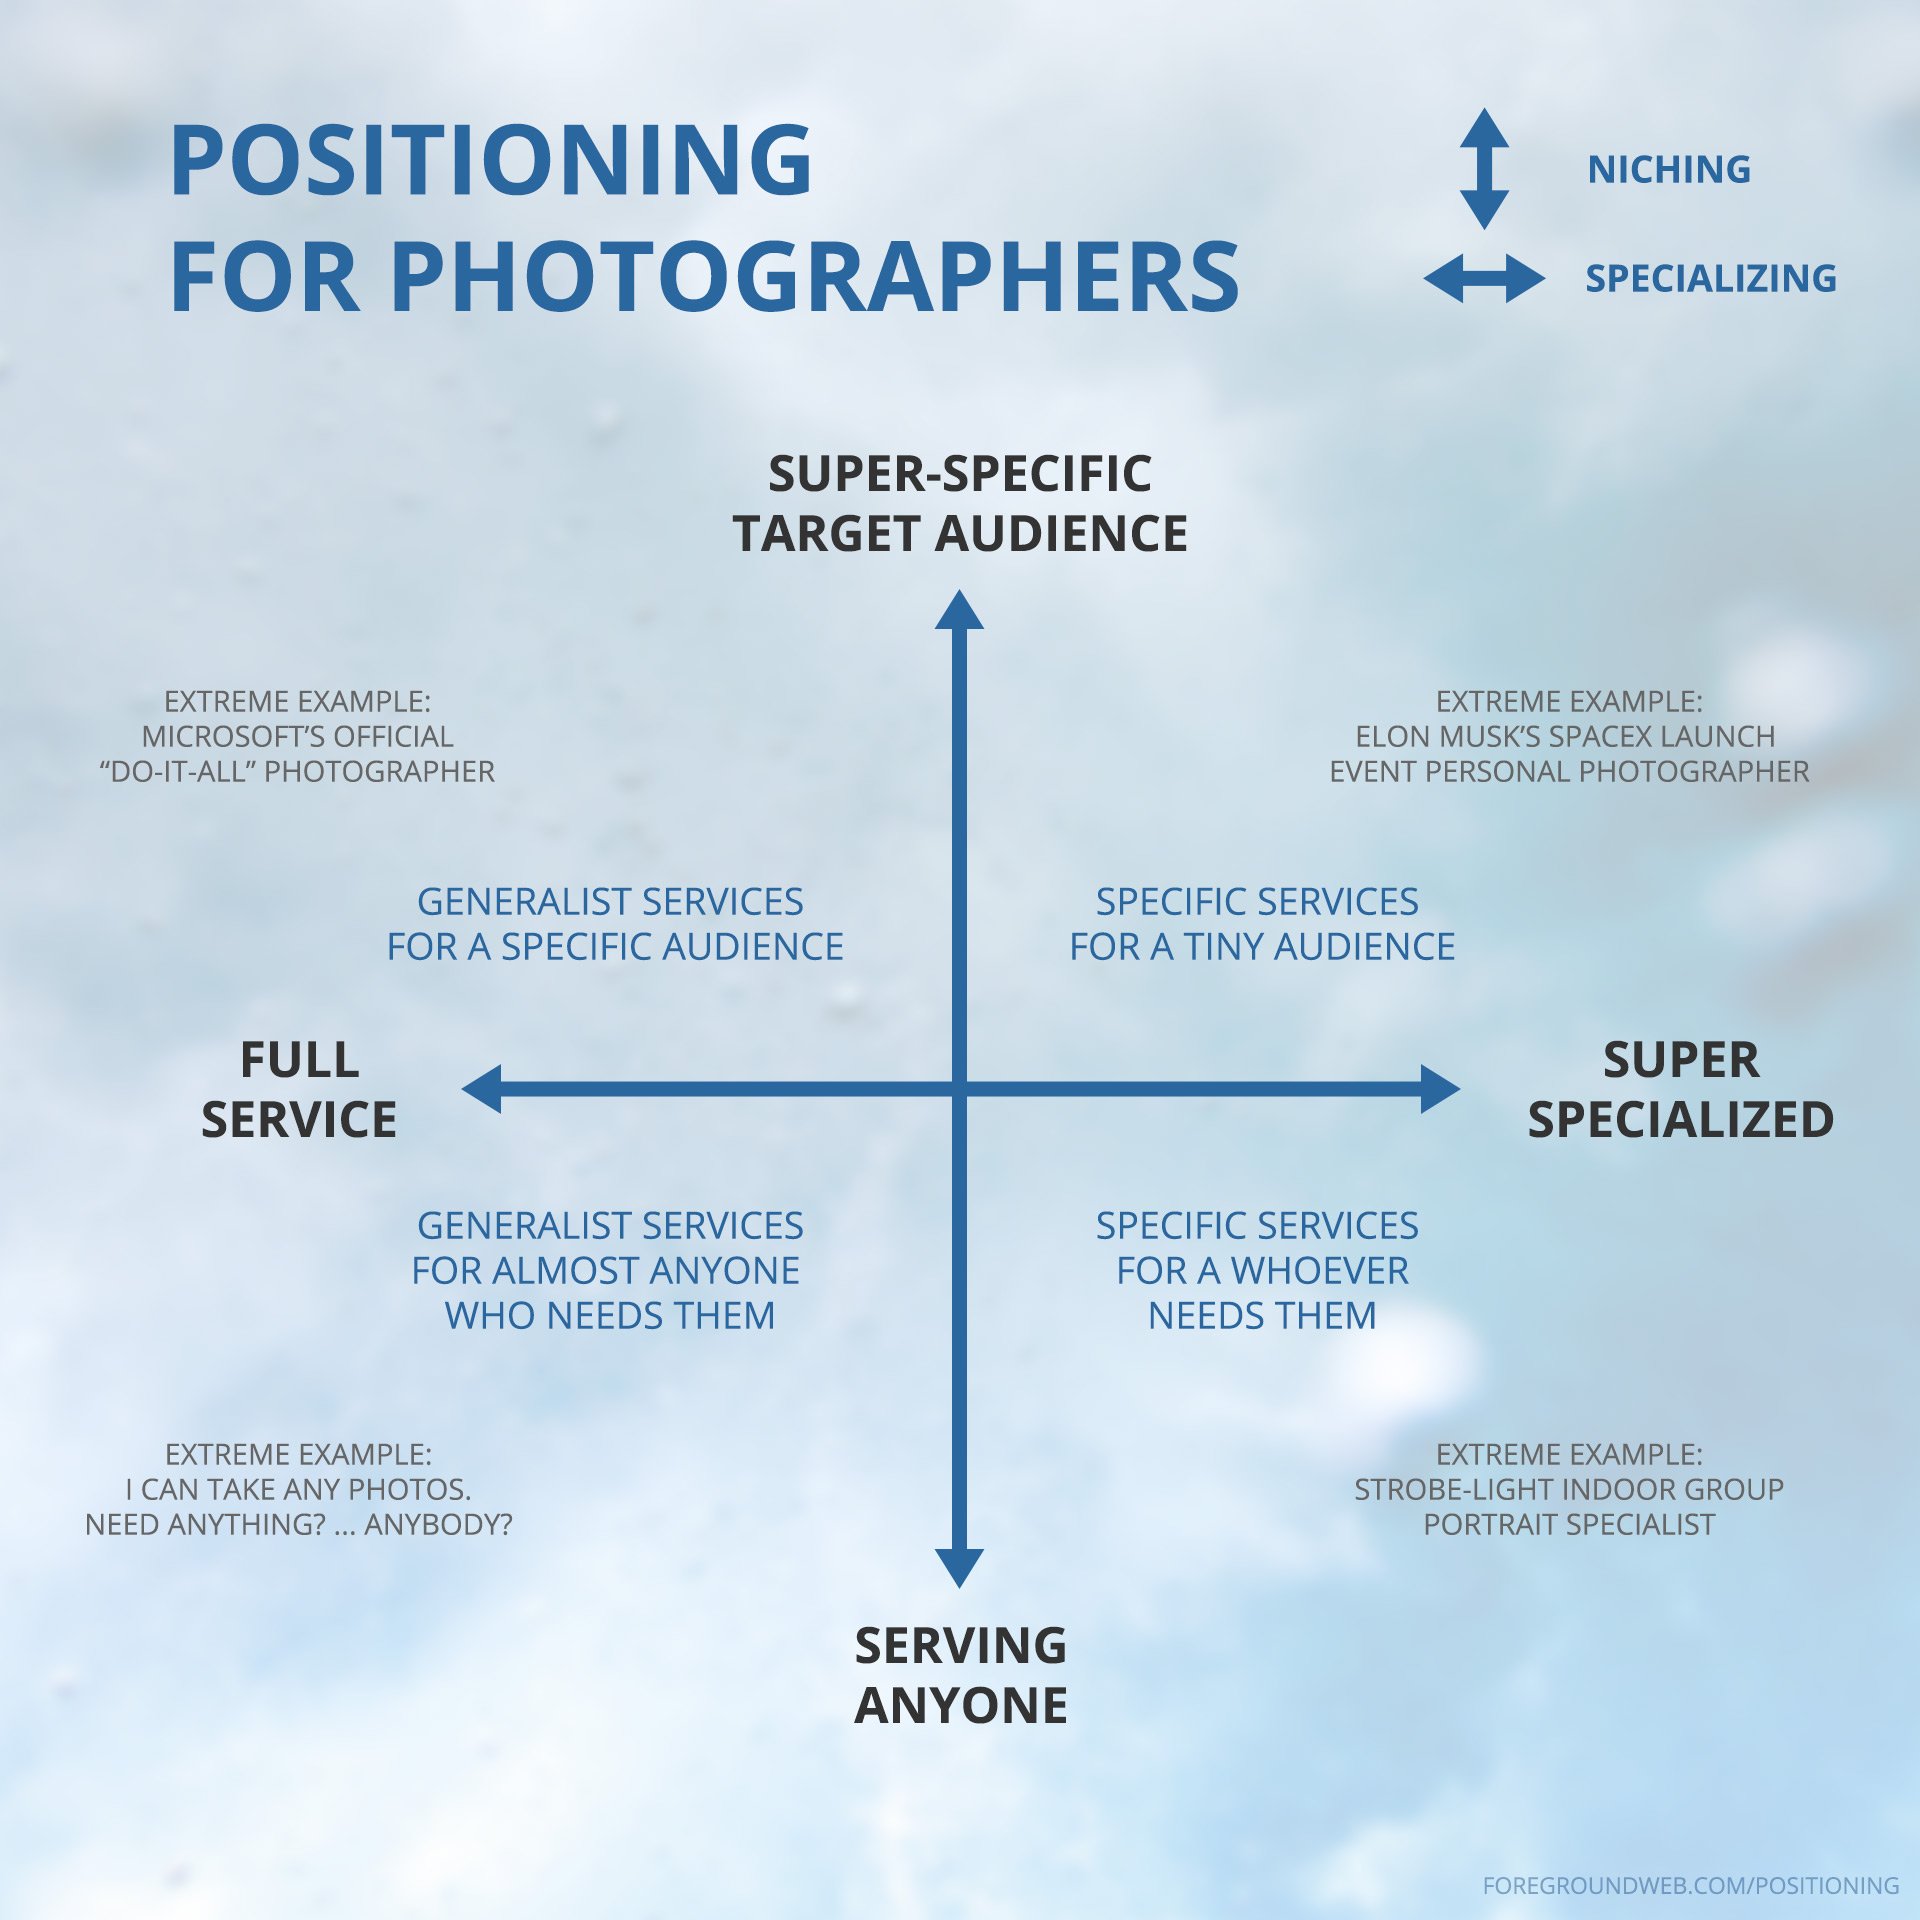 Business positioning chart for photographers: niching vs specializing, with examples